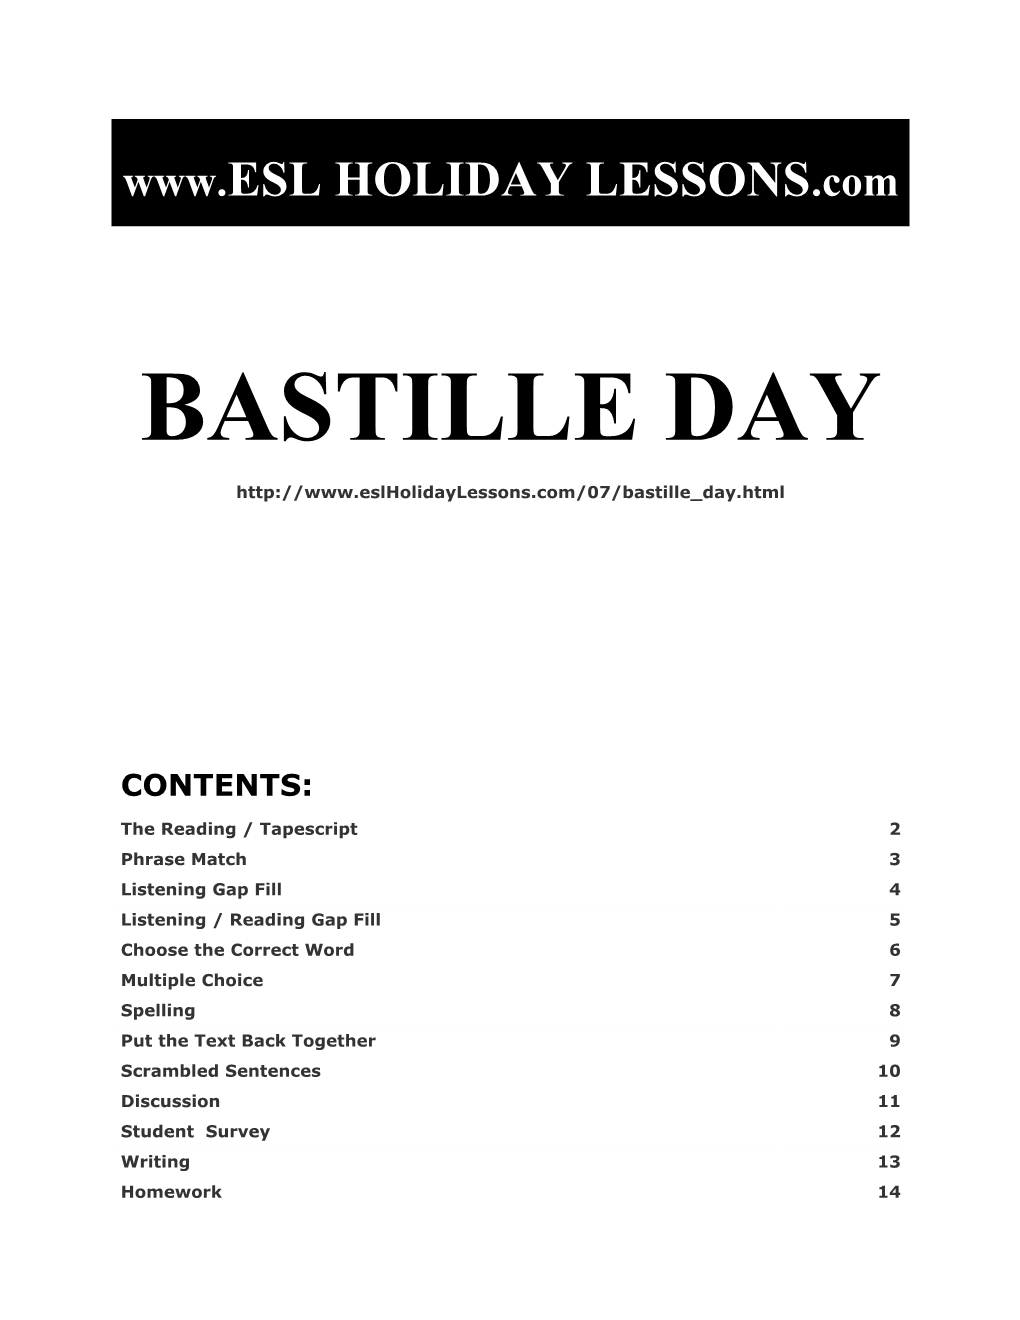 Holiday Lessons - Bastille Day